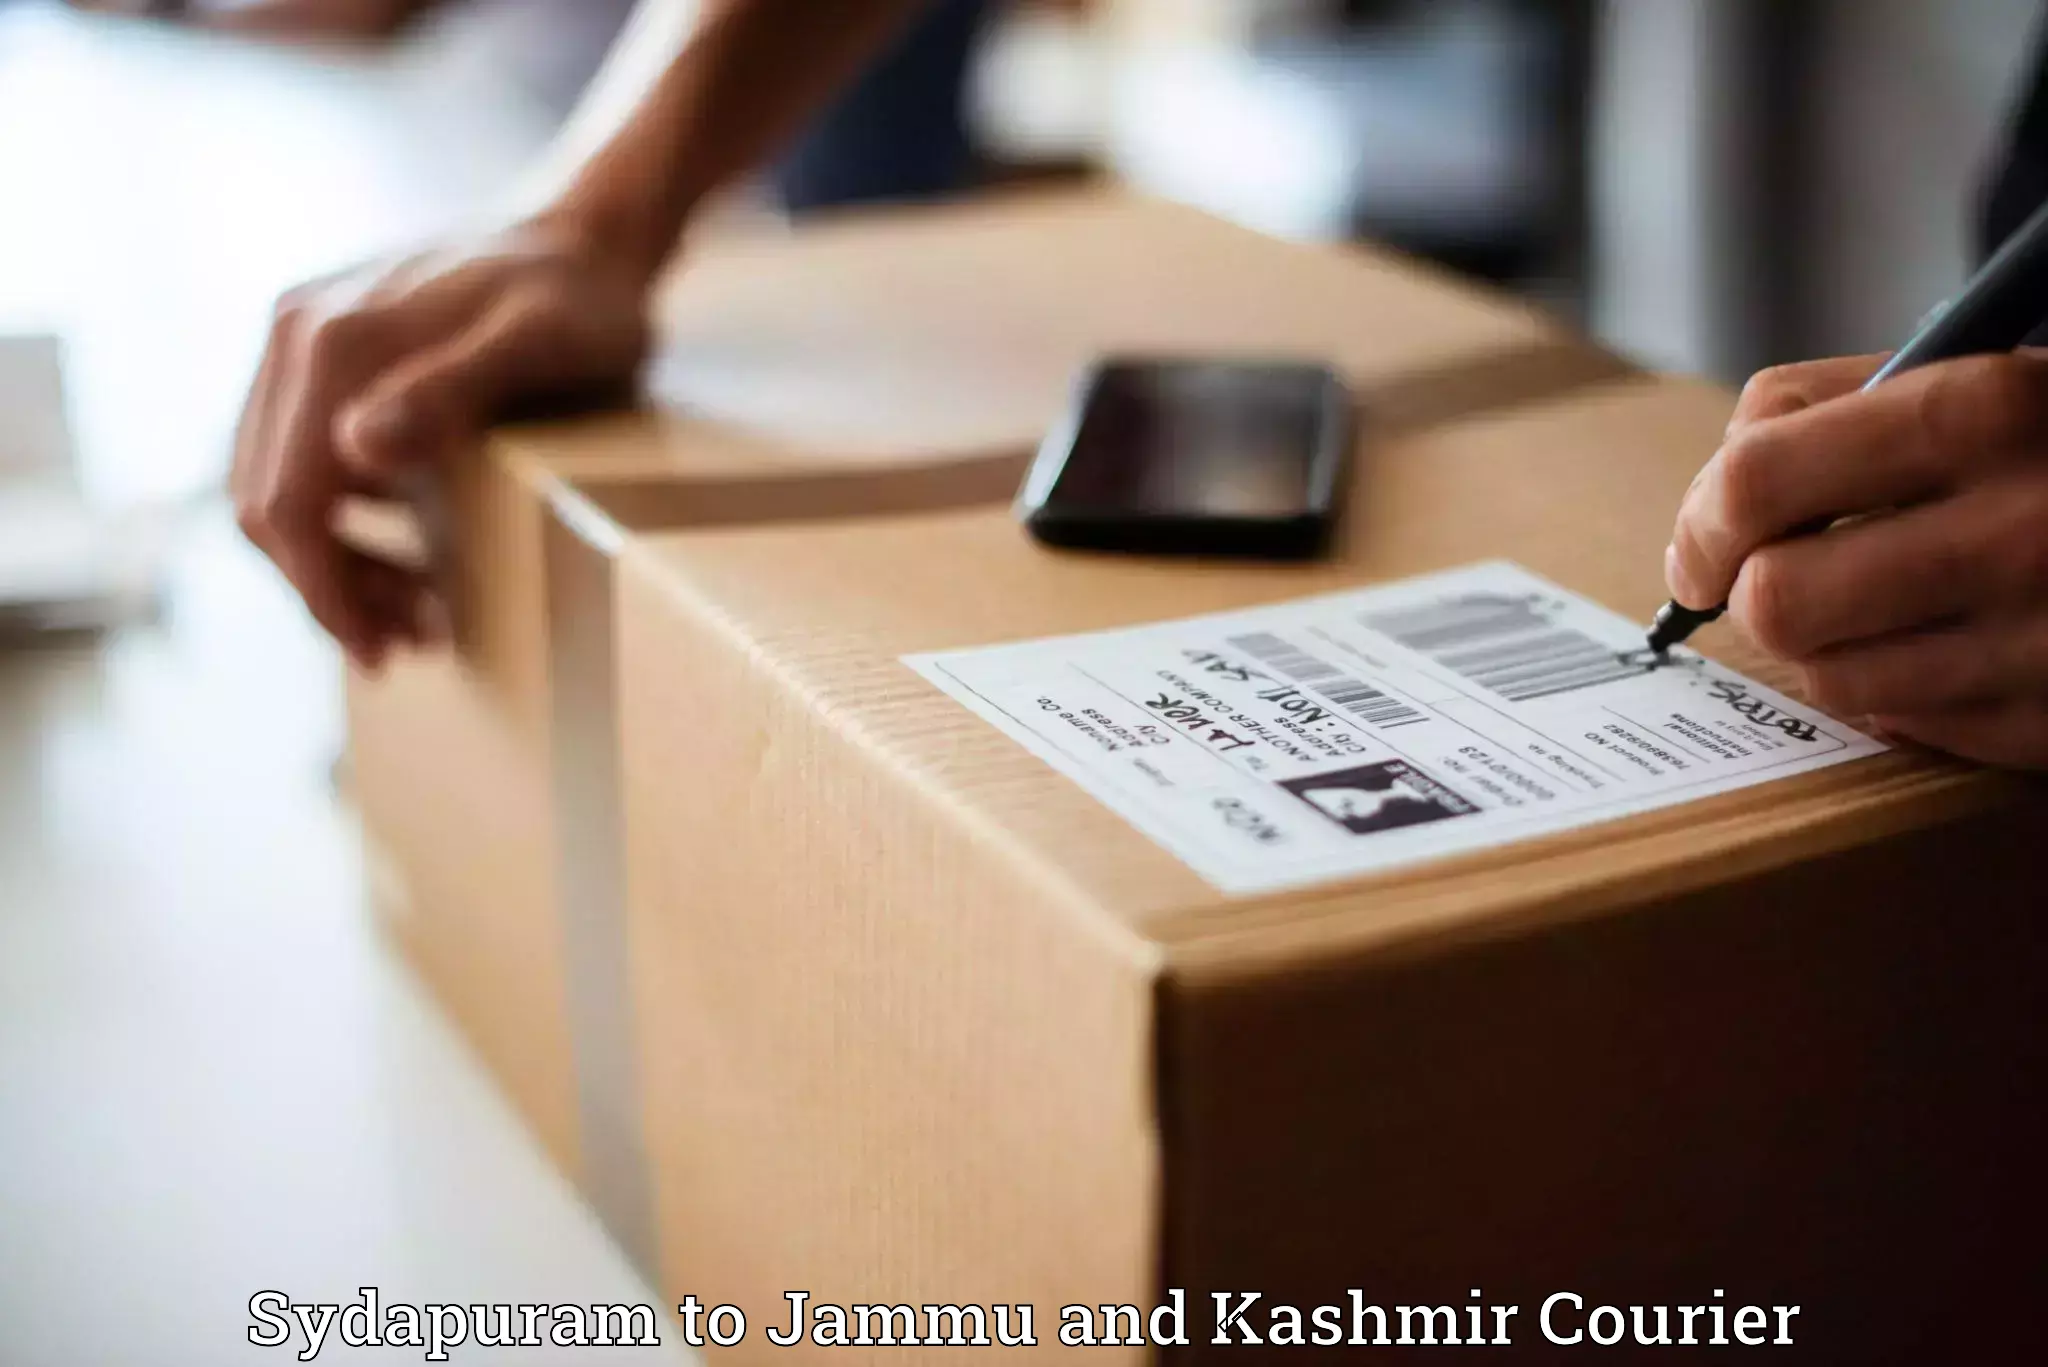 Reliable delivery network Sydapuram to Shopian